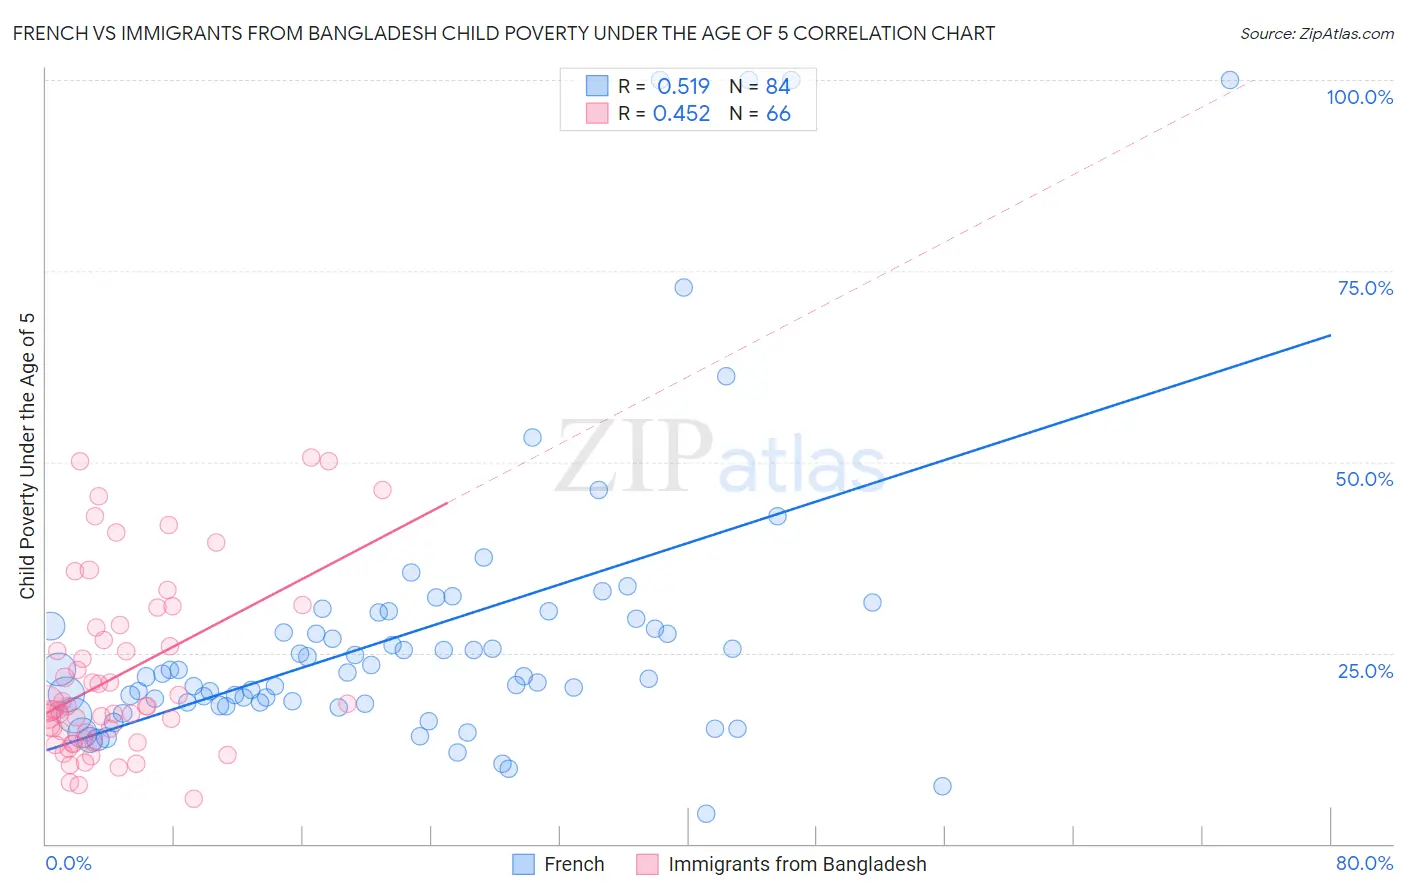 French vs Immigrants from Bangladesh Child Poverty Under the Age of 5